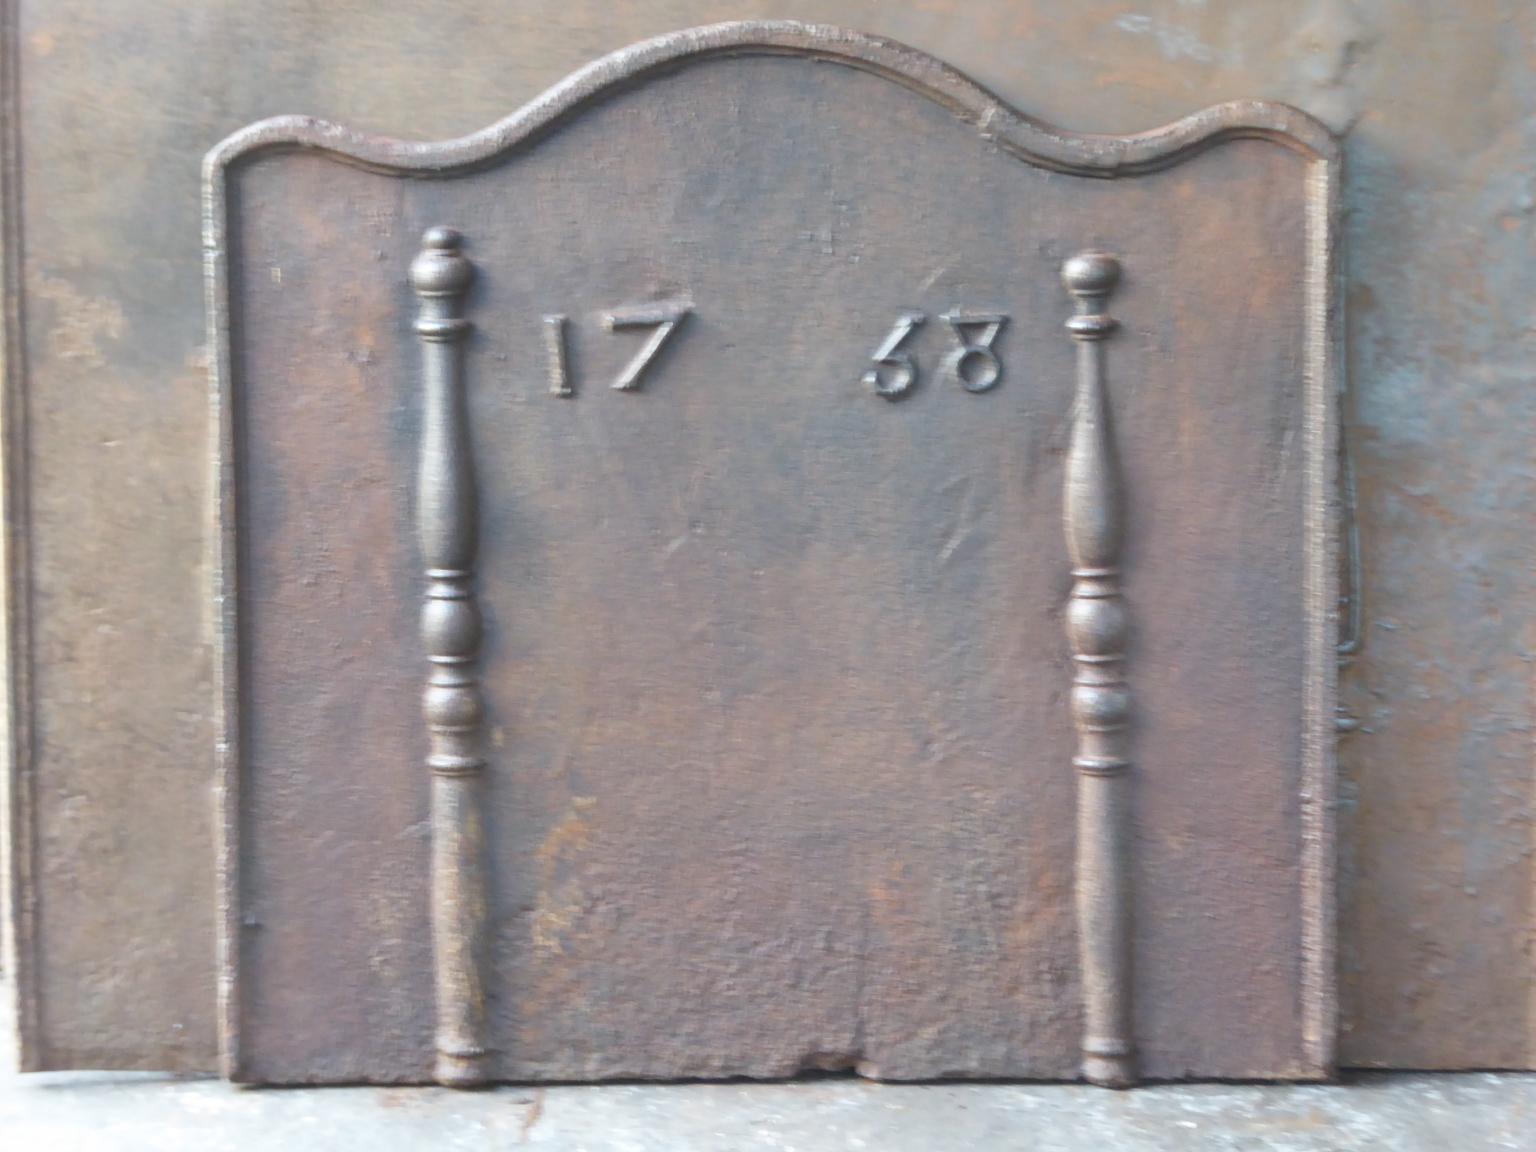 18th century French Louis XV fireback. The date of production, 1768, is cast in the fireback. The pillars refer to the club of Hercules and symbolize strength and the unknown.

The fireback is made of cast iron and has a natural brown patina. Upon